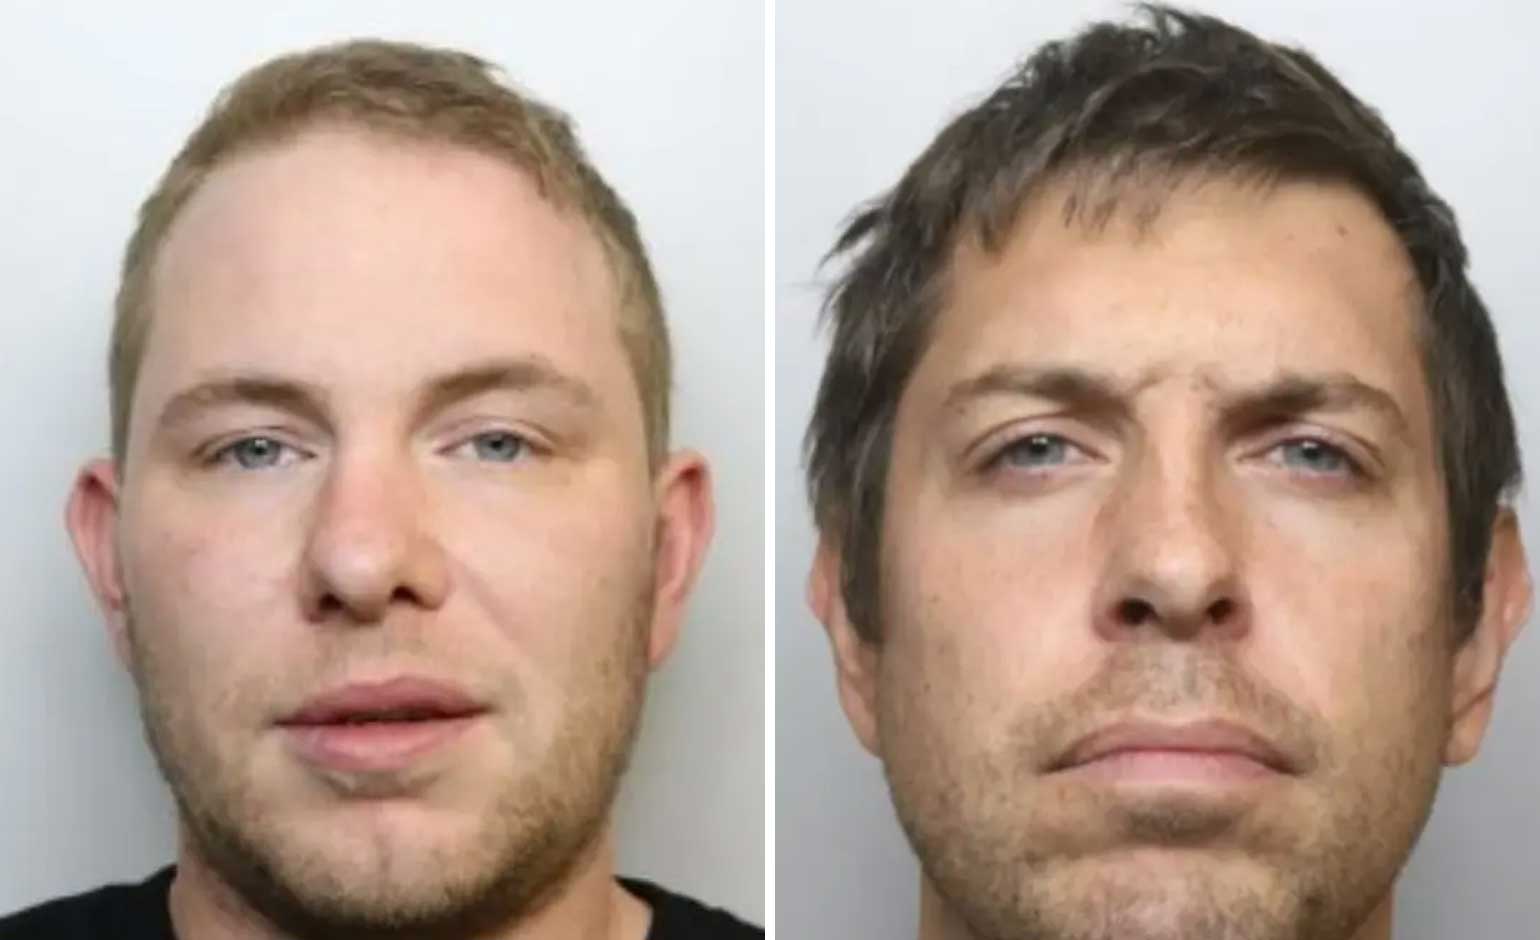 Pair jailed for stealing more than £5.7m in cryptocurrency scam